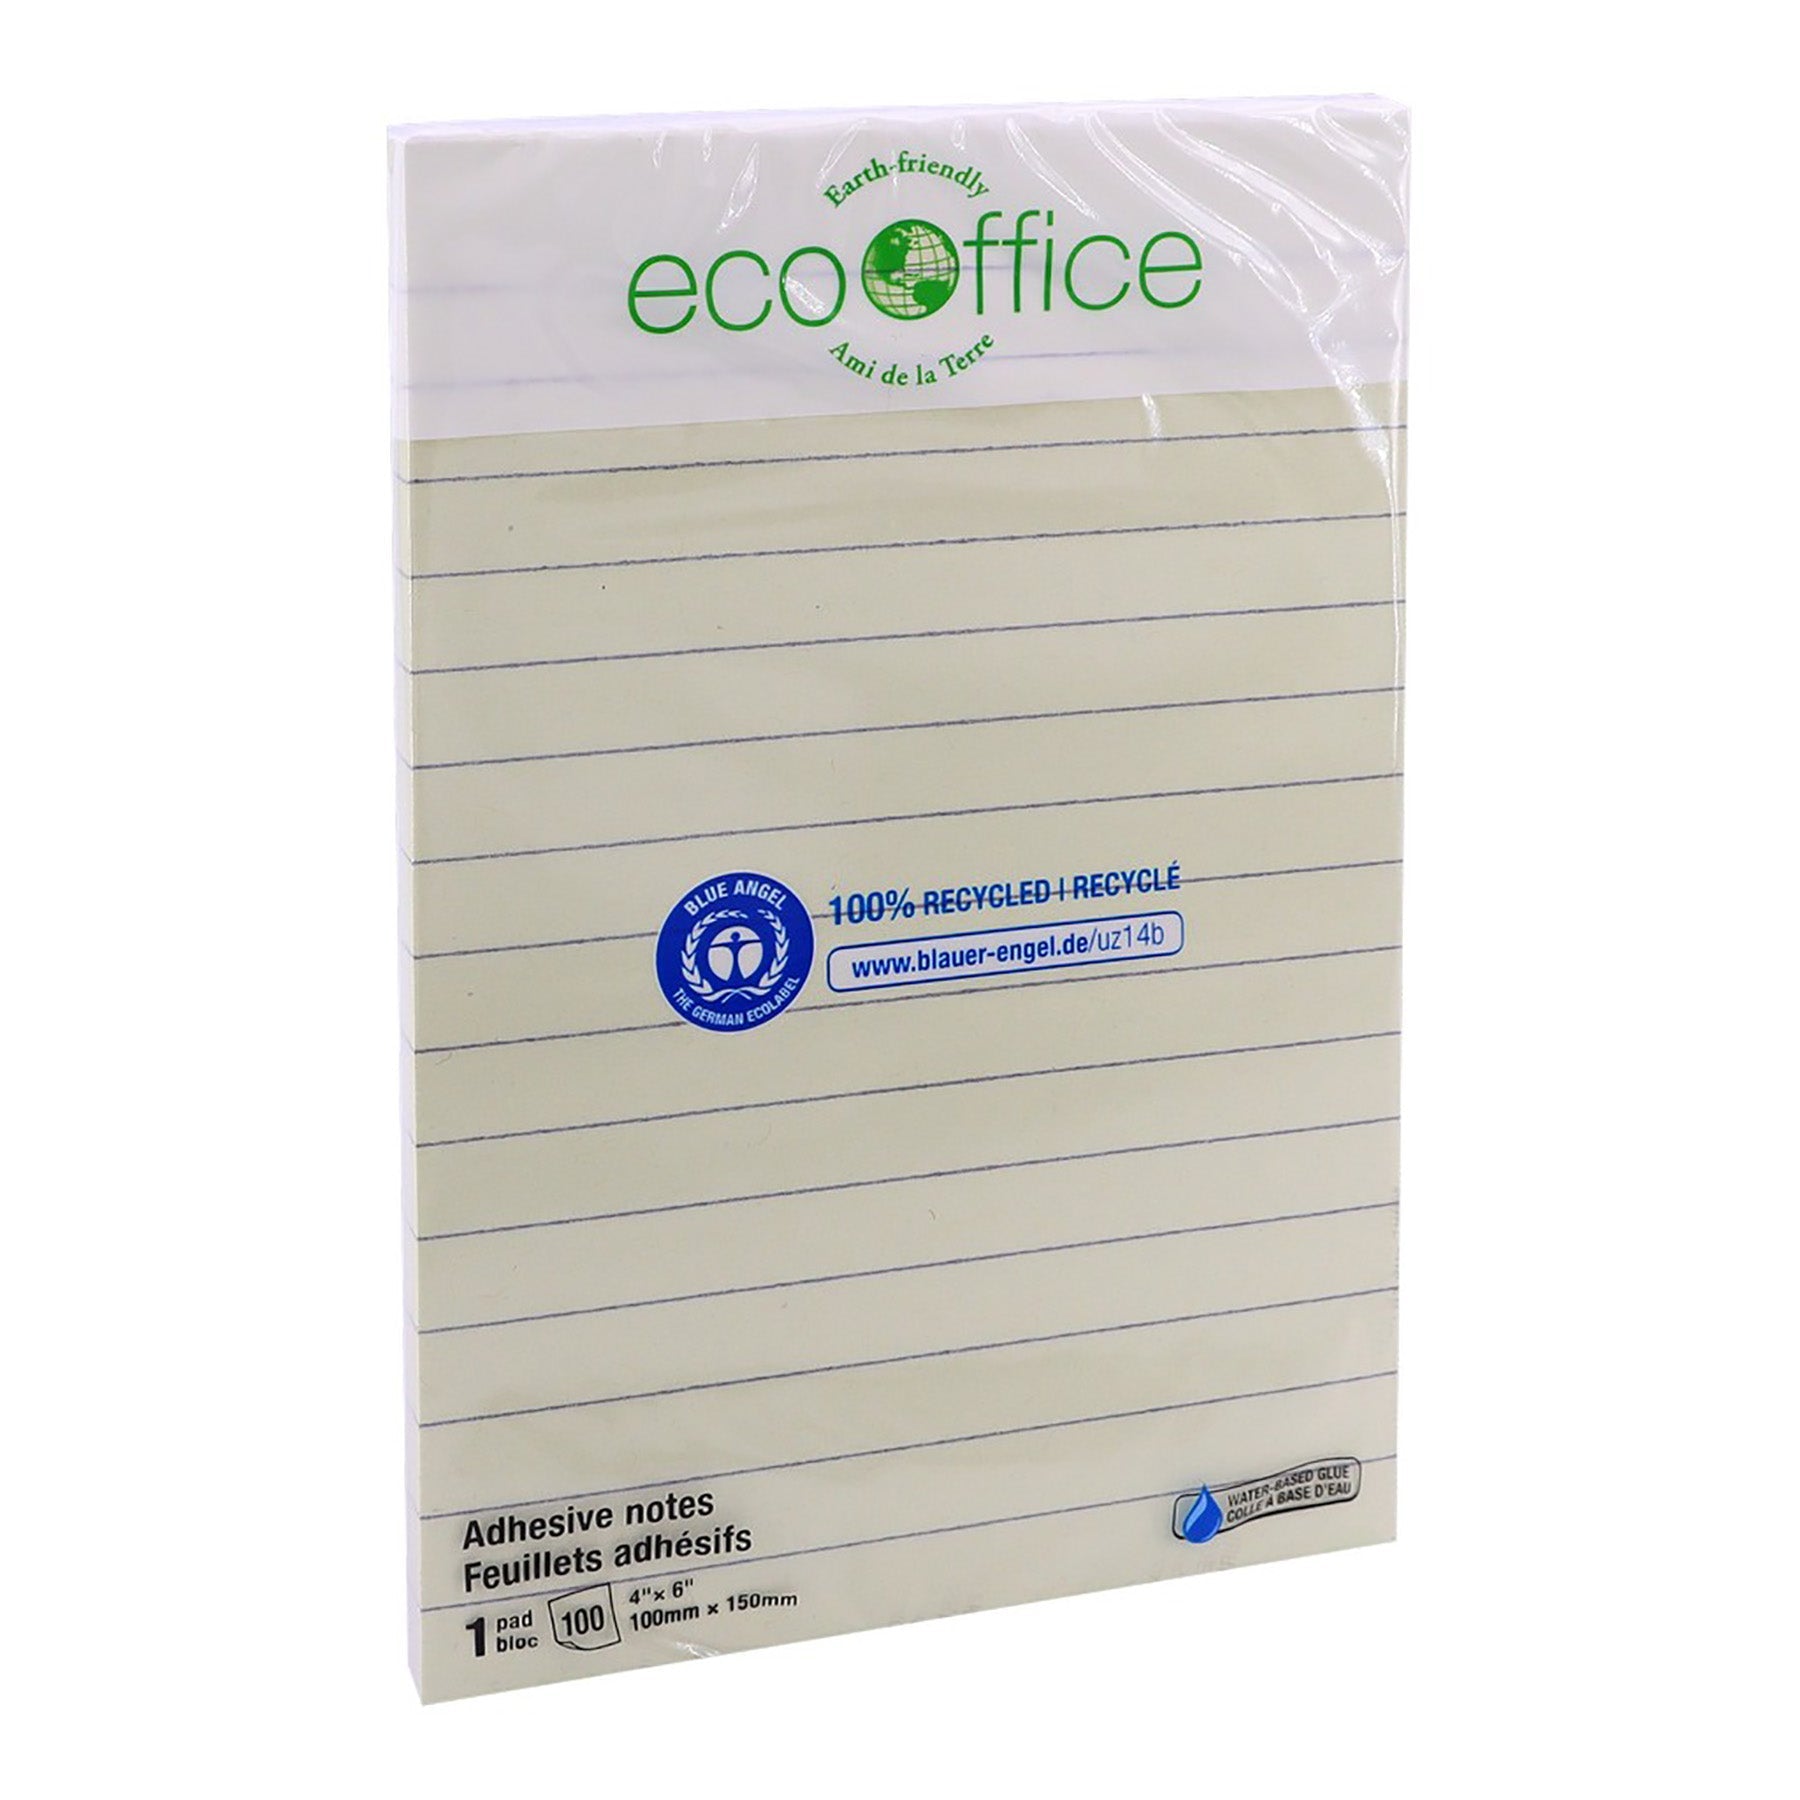 EcoOffice 100 Sheets Adhesive Notes Lined Yellow 4x6in 